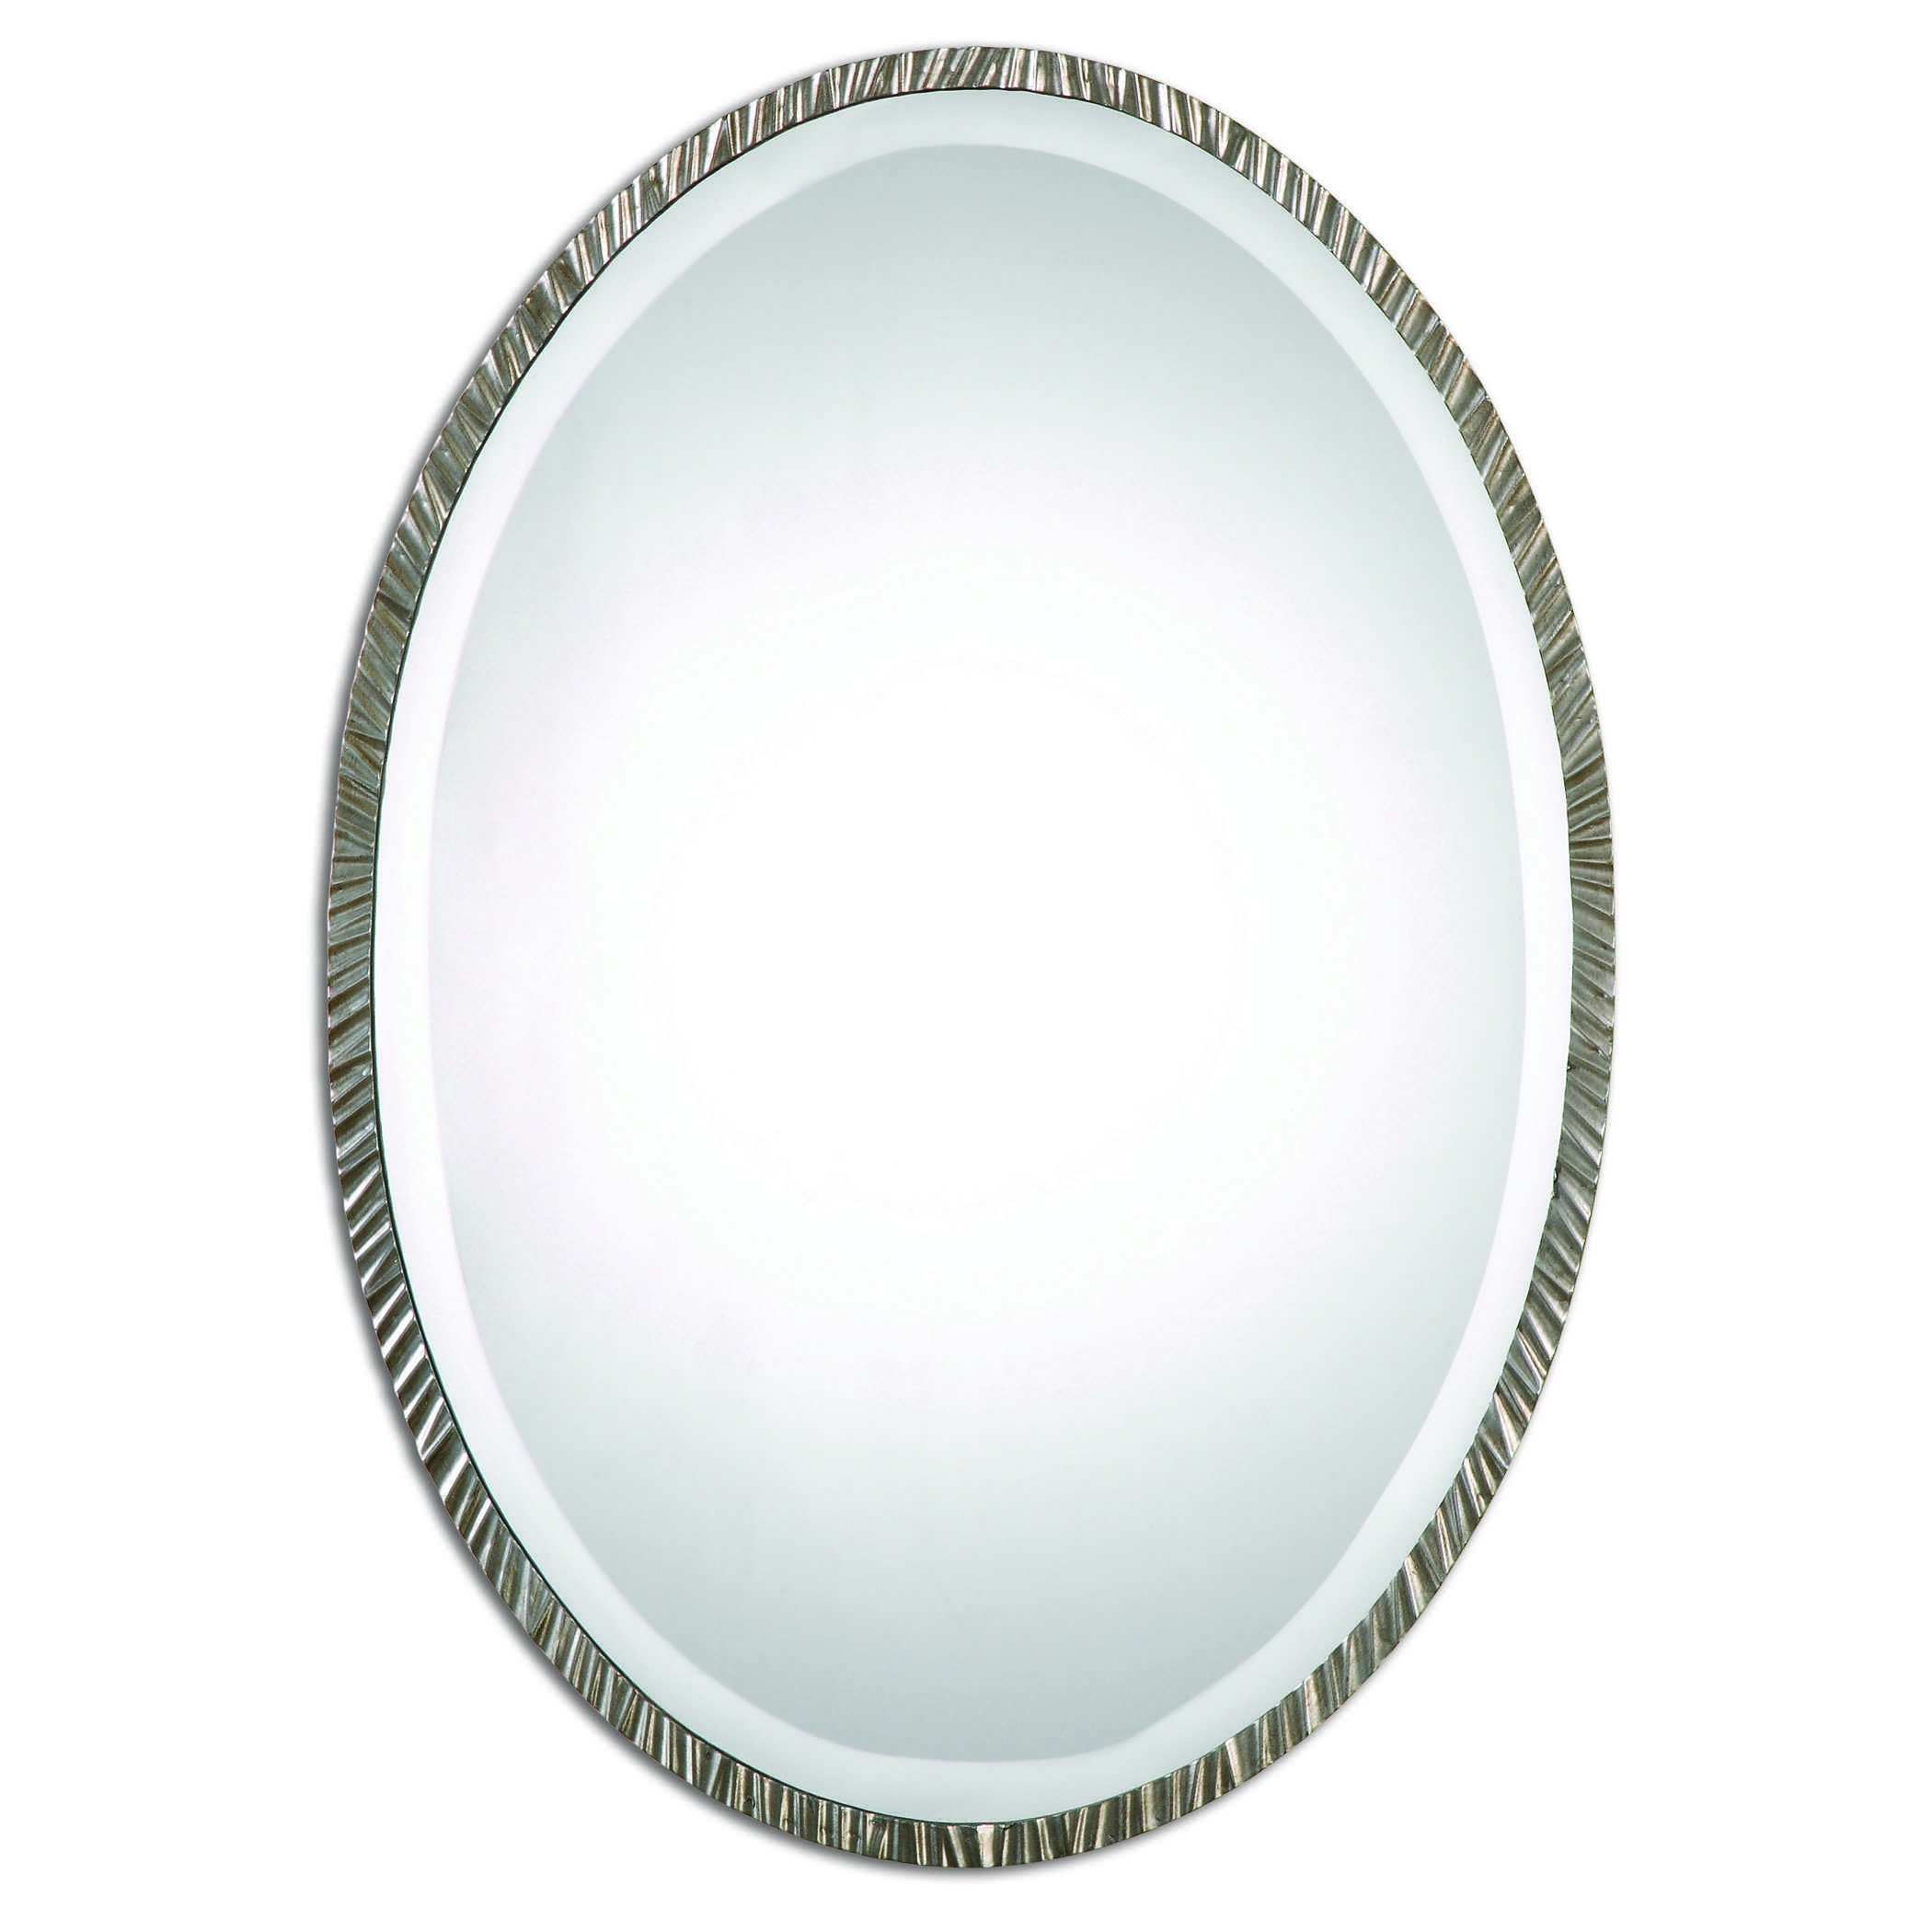 ANNADEL OVAL MIRROR - Image 0